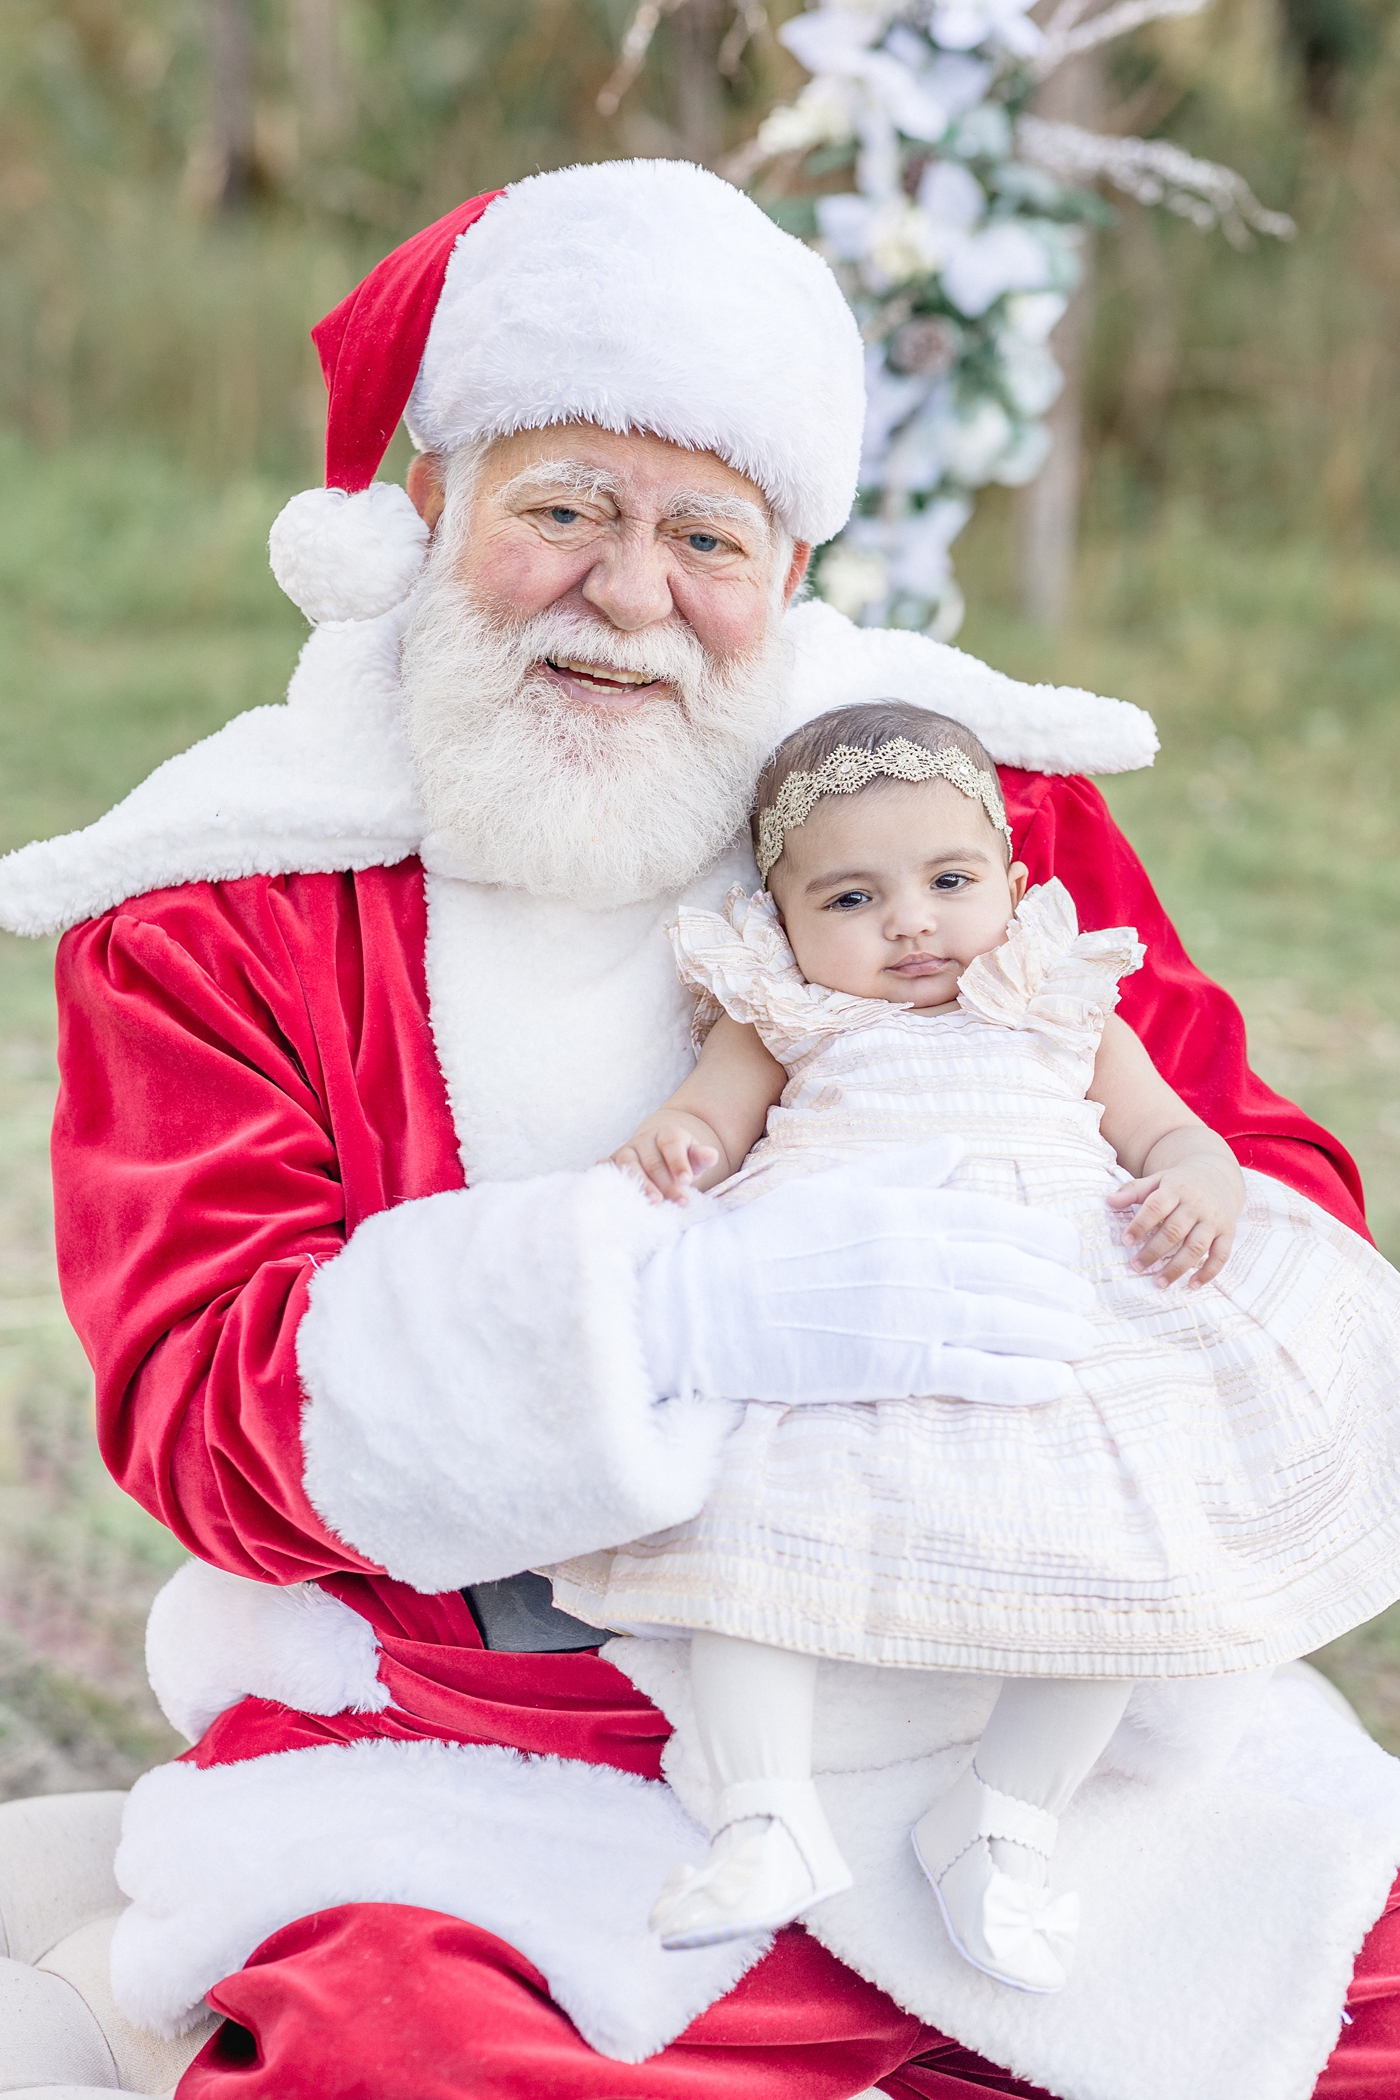 Baby girl and Santa smile for photograph. Photo by Ivanna Vidal Photography.